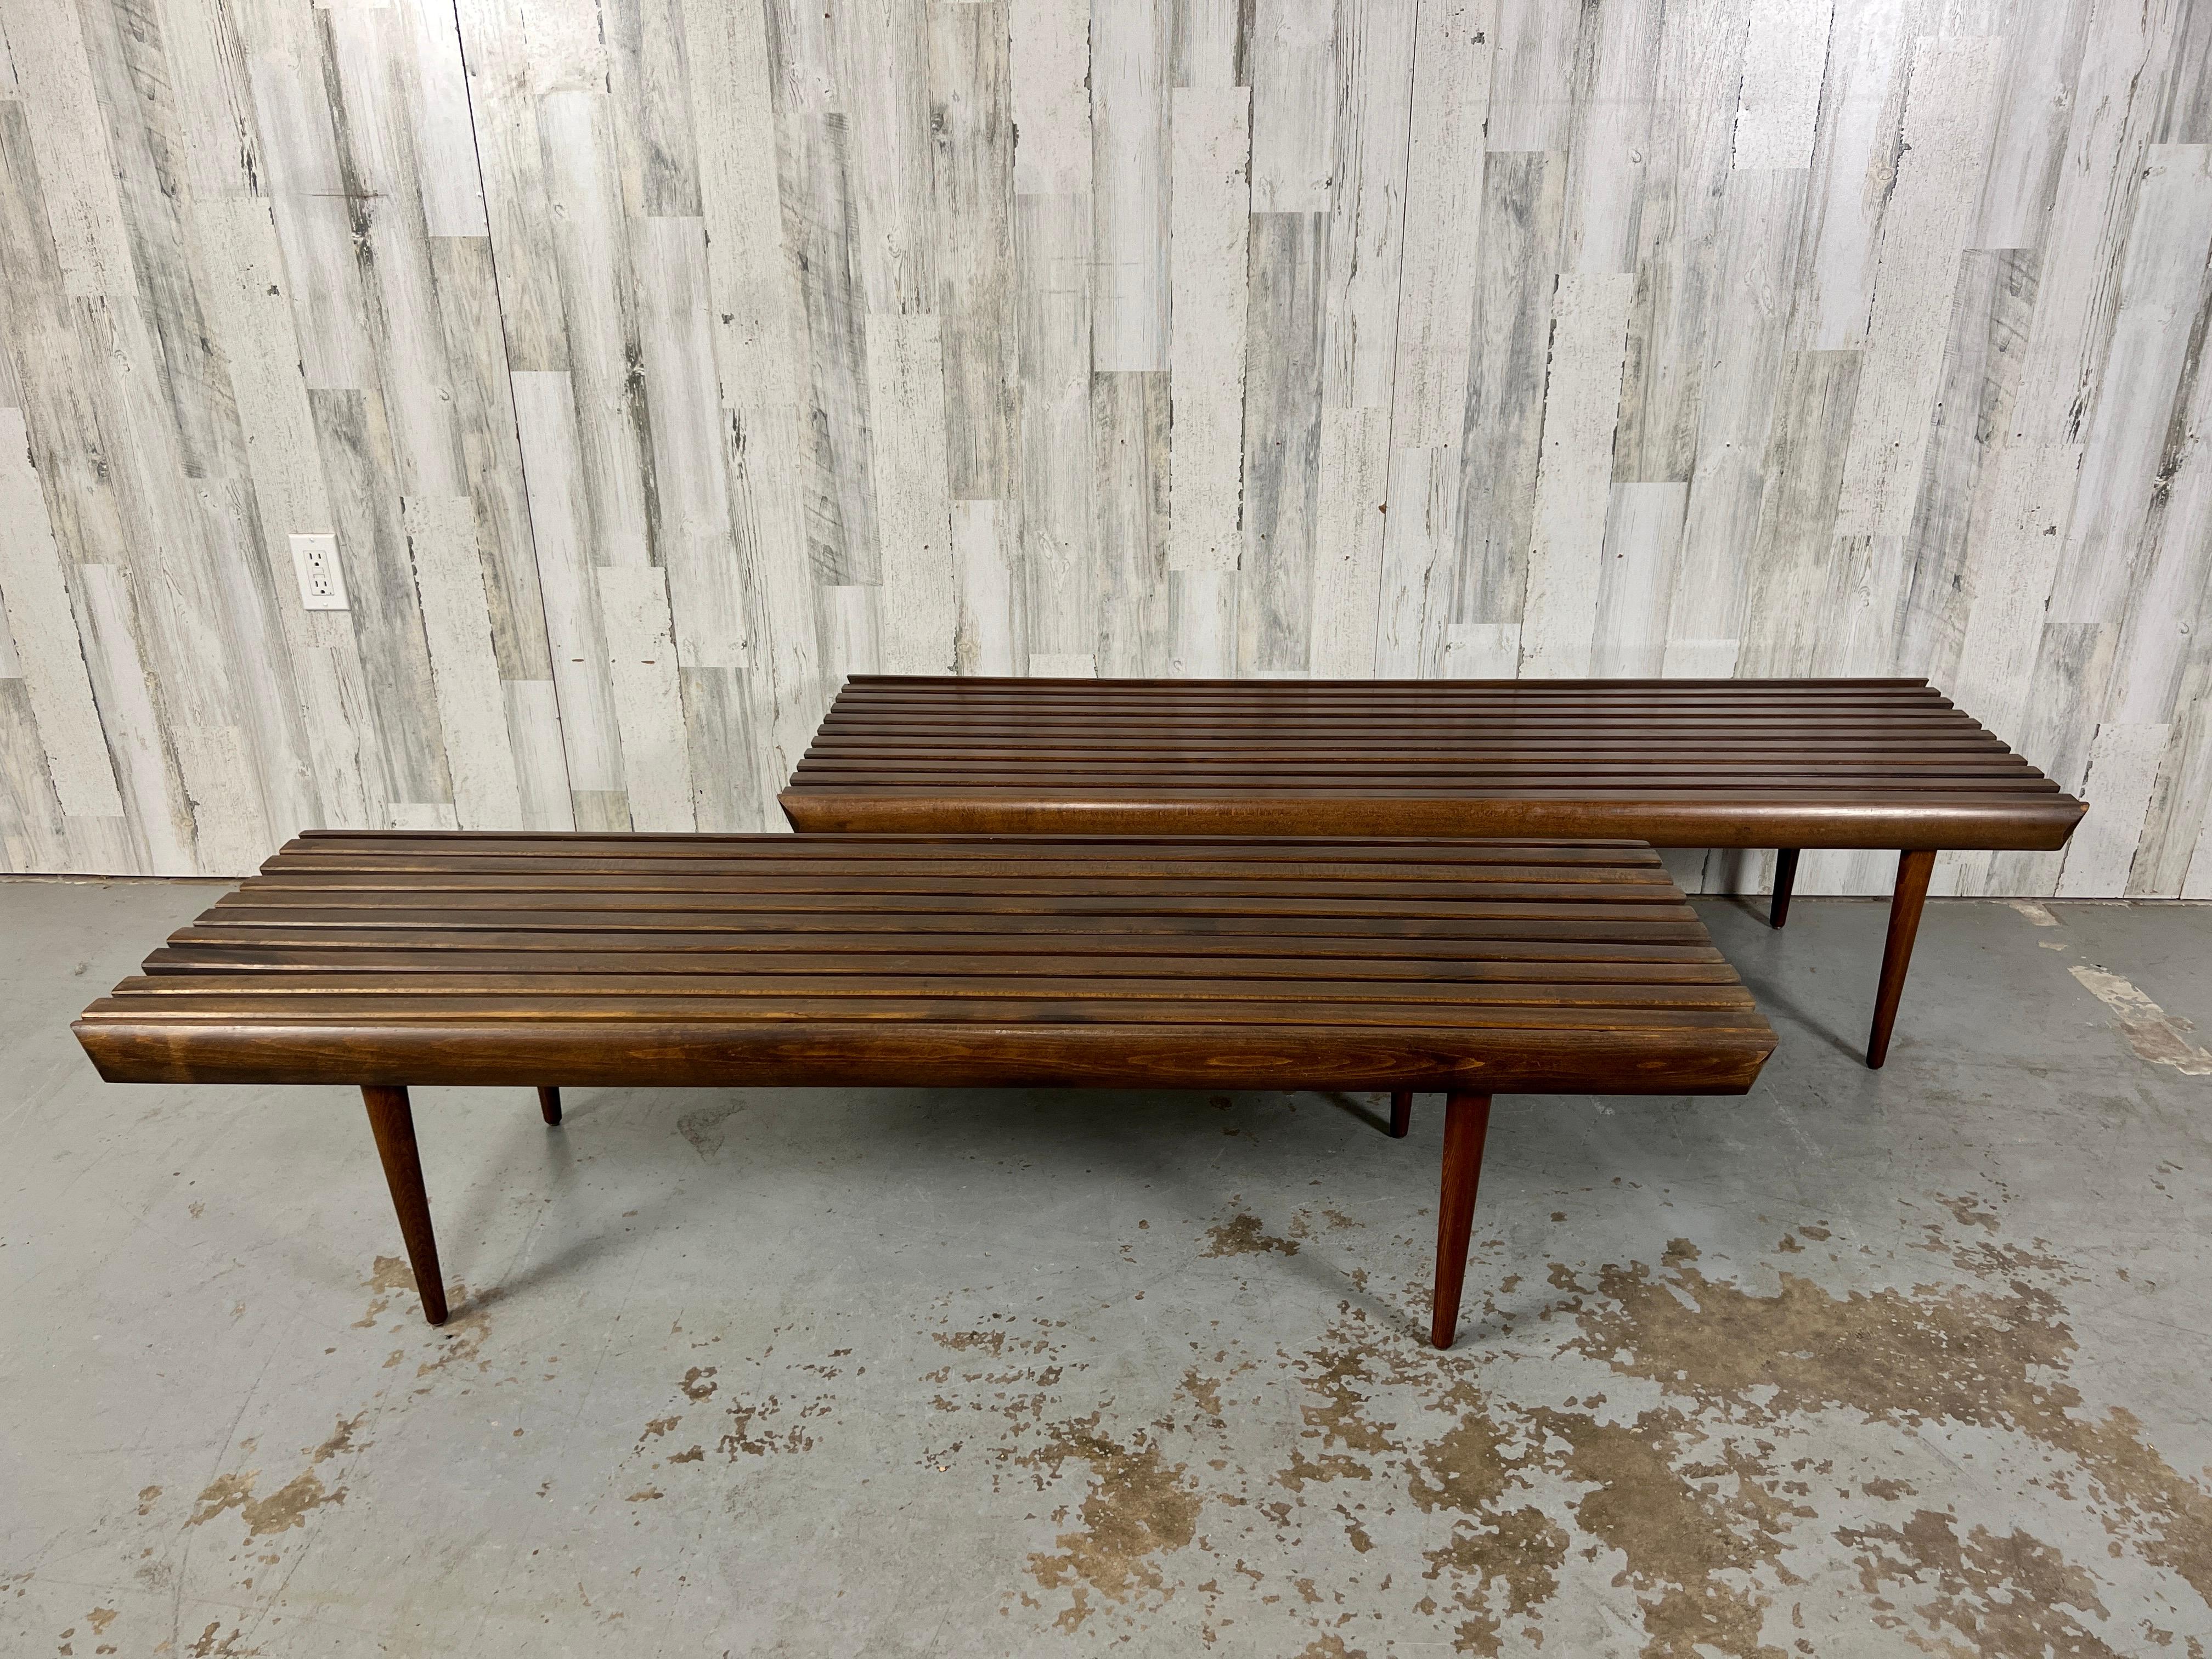 Two Mid-century slat wood benches similar in size, one has 9 slats and the other has 10 slats, great for under a window or to be used as a coffee tables. all original condition.

1. 60